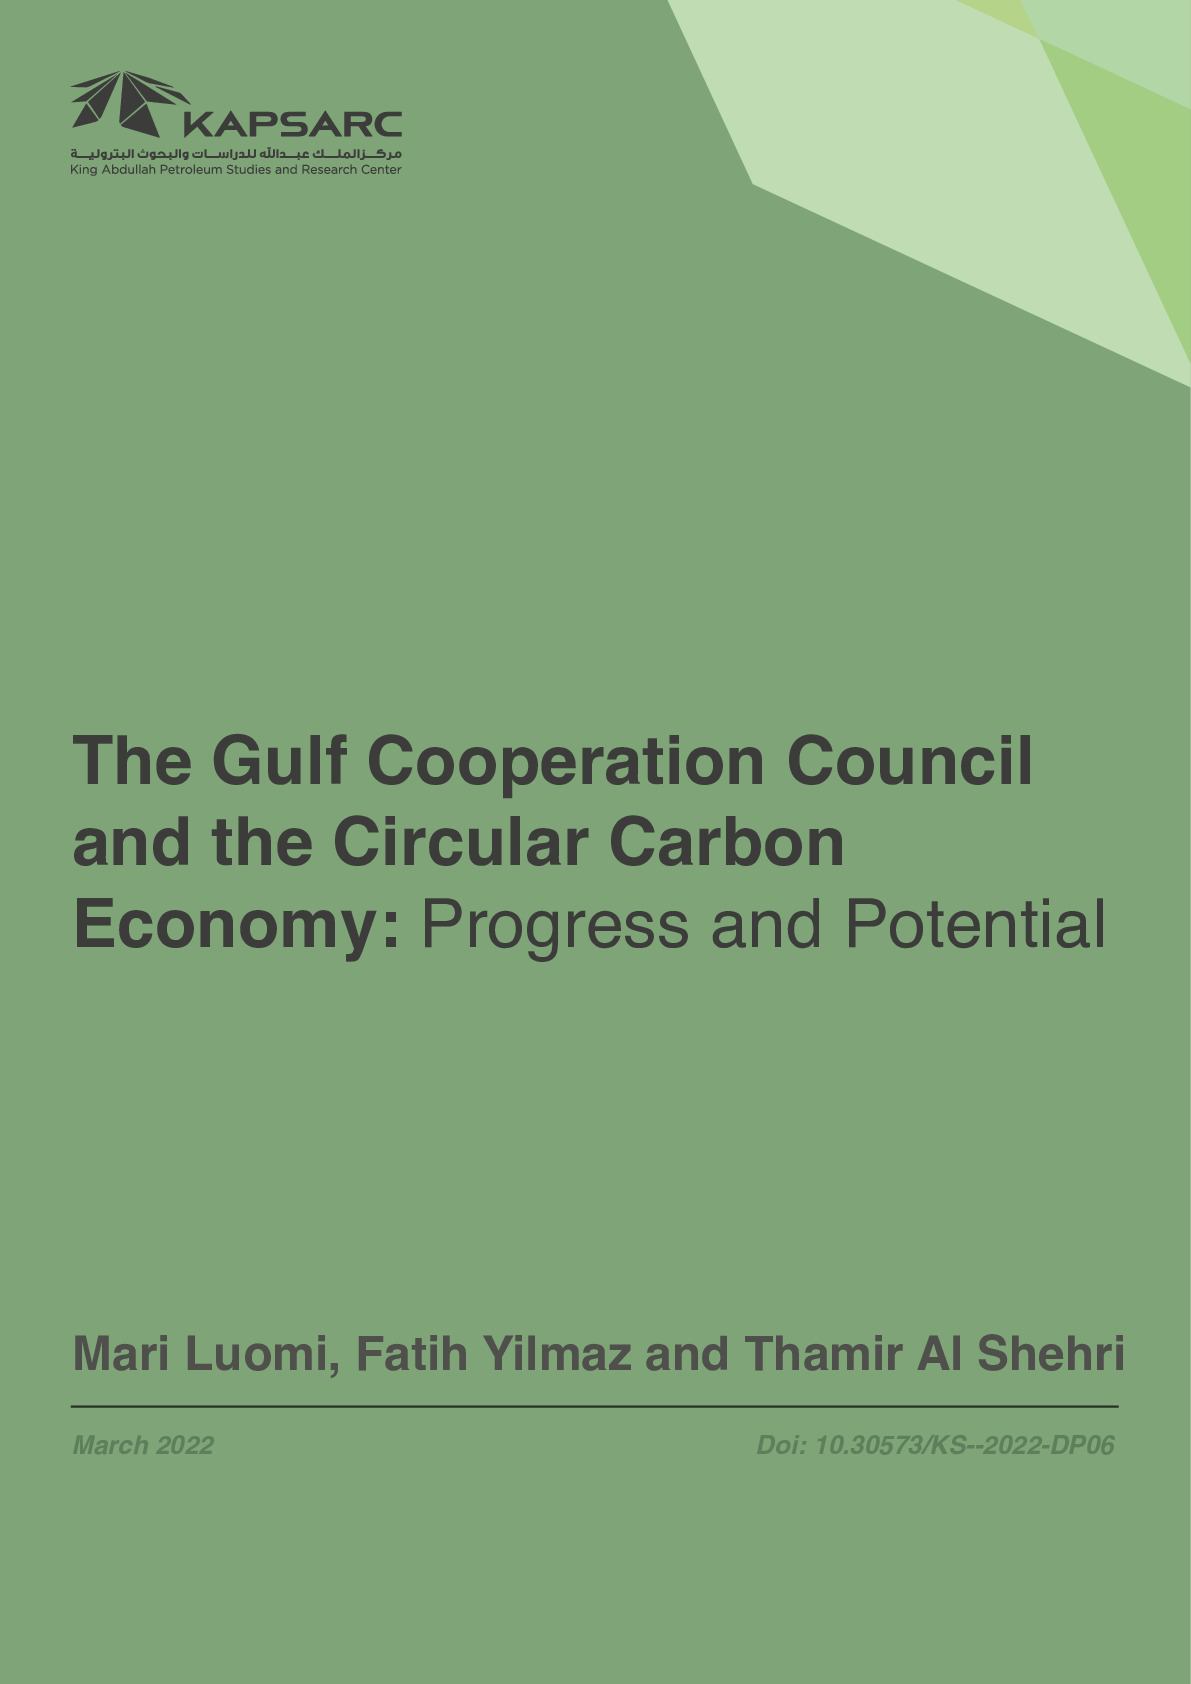 The Gulf Cooperation Council and the Circular Carbon Economy: Progress and Potential